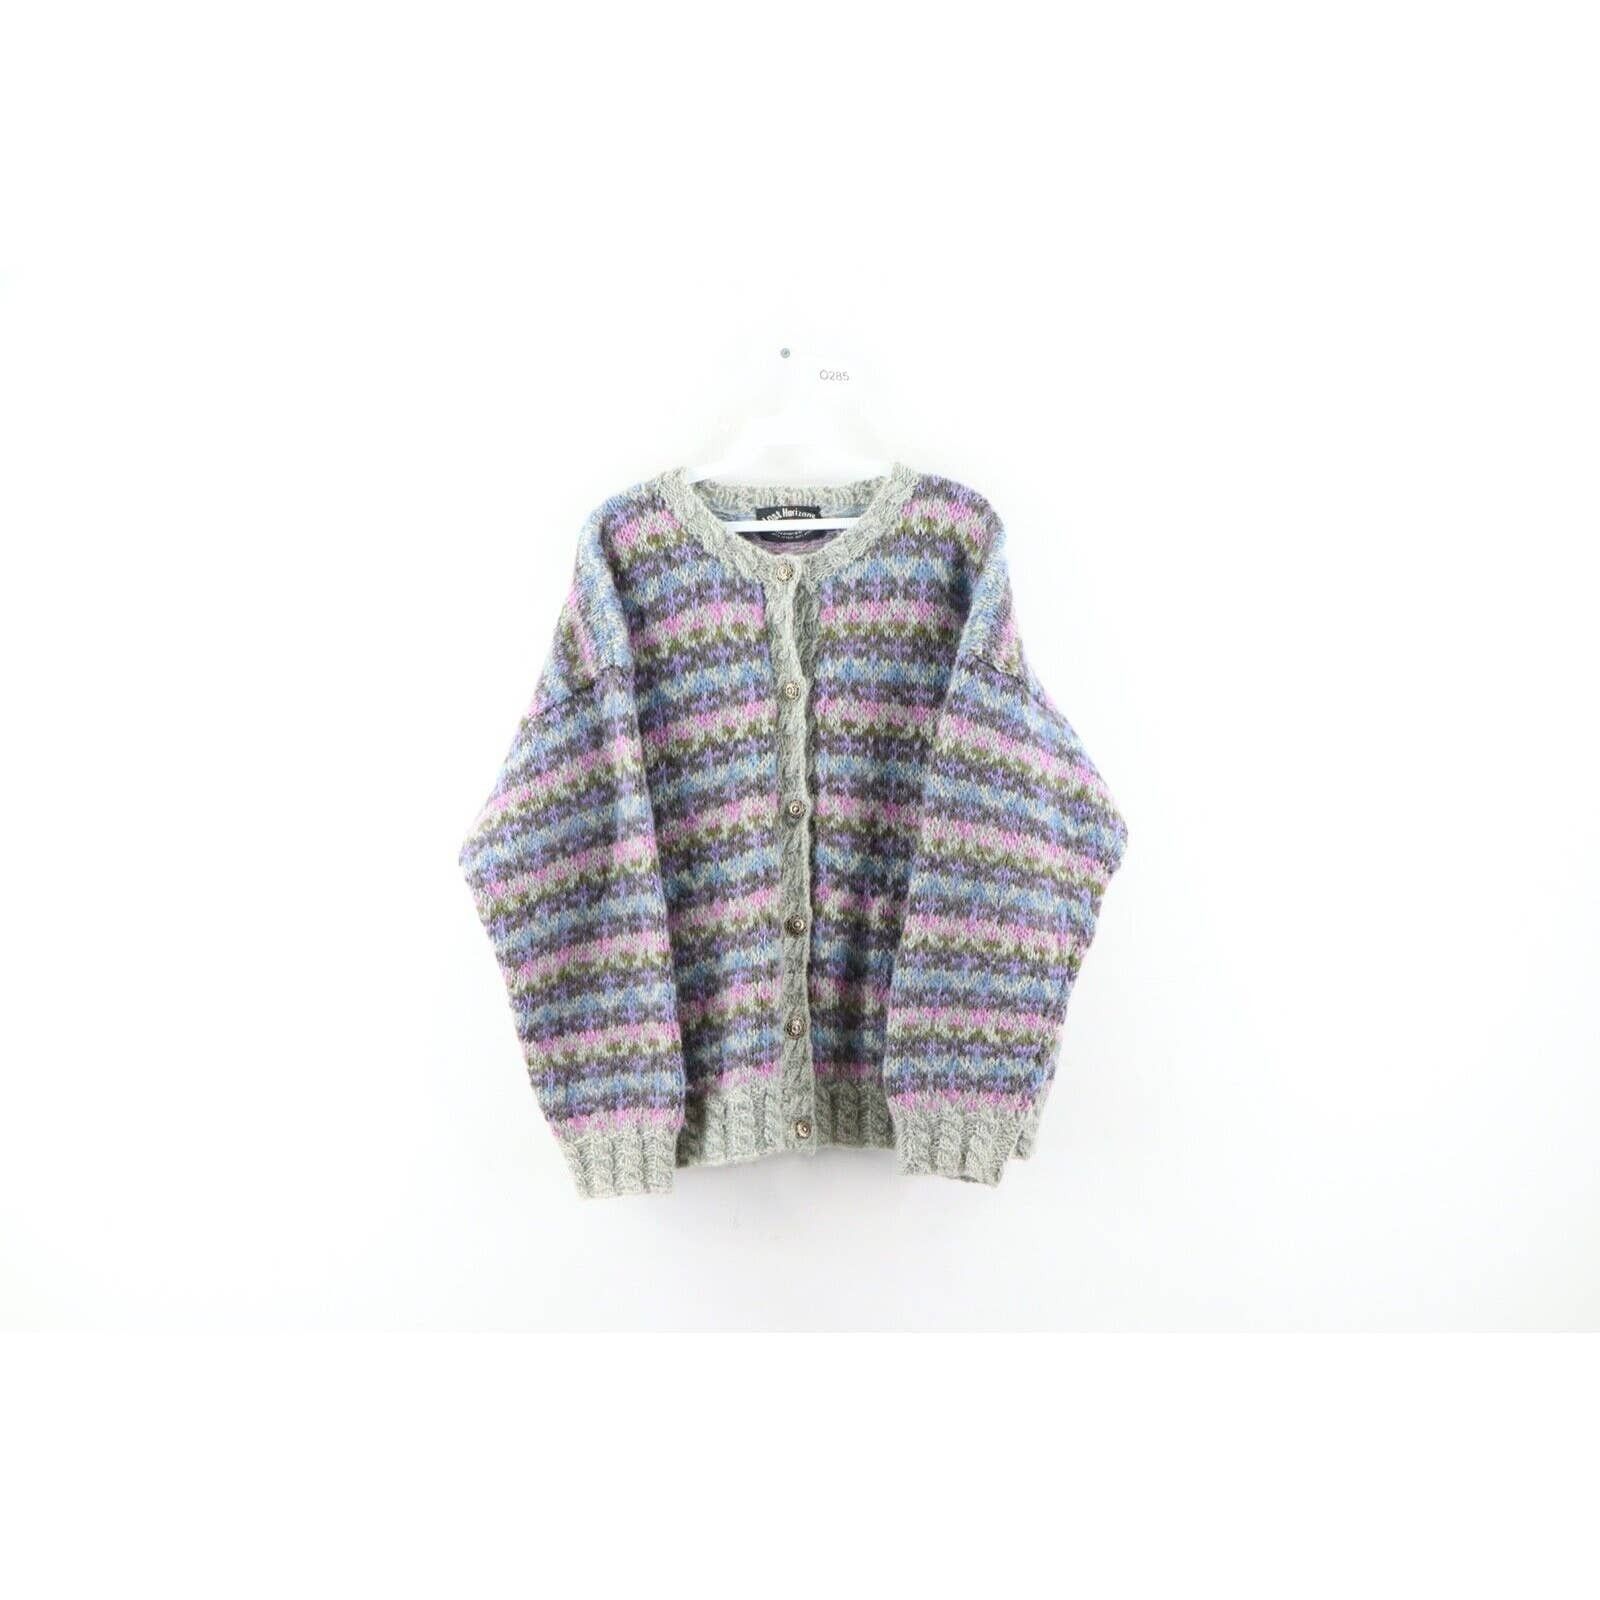 Vintage Vintage Rockabilly Womens Large Hand Knit Fair Isle Wool Size L / US 10 / IT 46 - 1 Preview